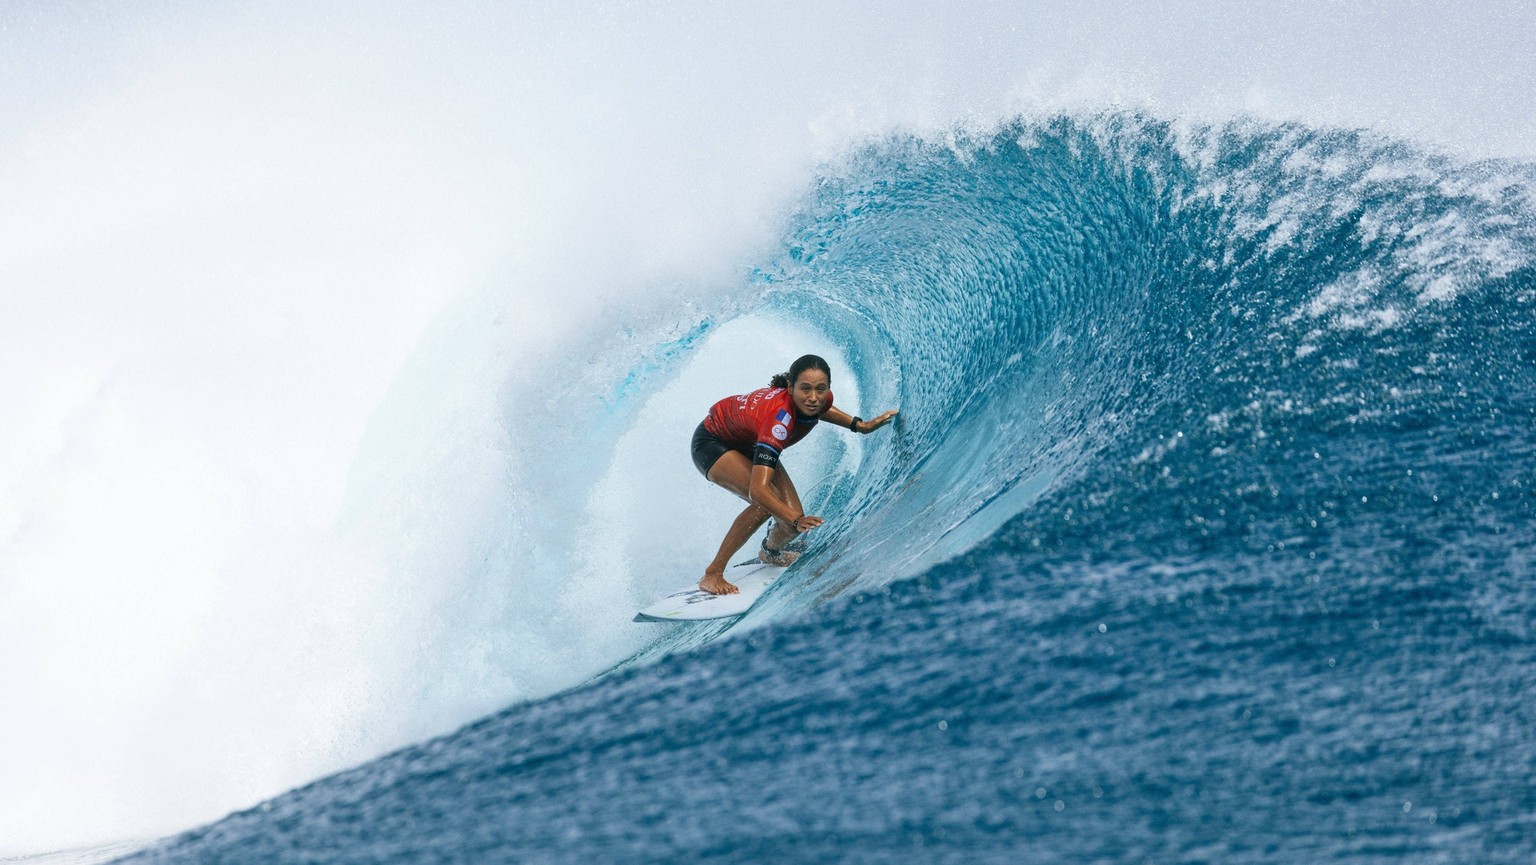 August 16, 2023, Teahupo o, Tahiti, French Polynesia: Vahine Fierro of France surfs in Heat 2 of the Semifinals at the SHISEIDO Tahiti Pro on August 16, 2023 at Teahupo o, Tahiti, French Polynesia. Te ...